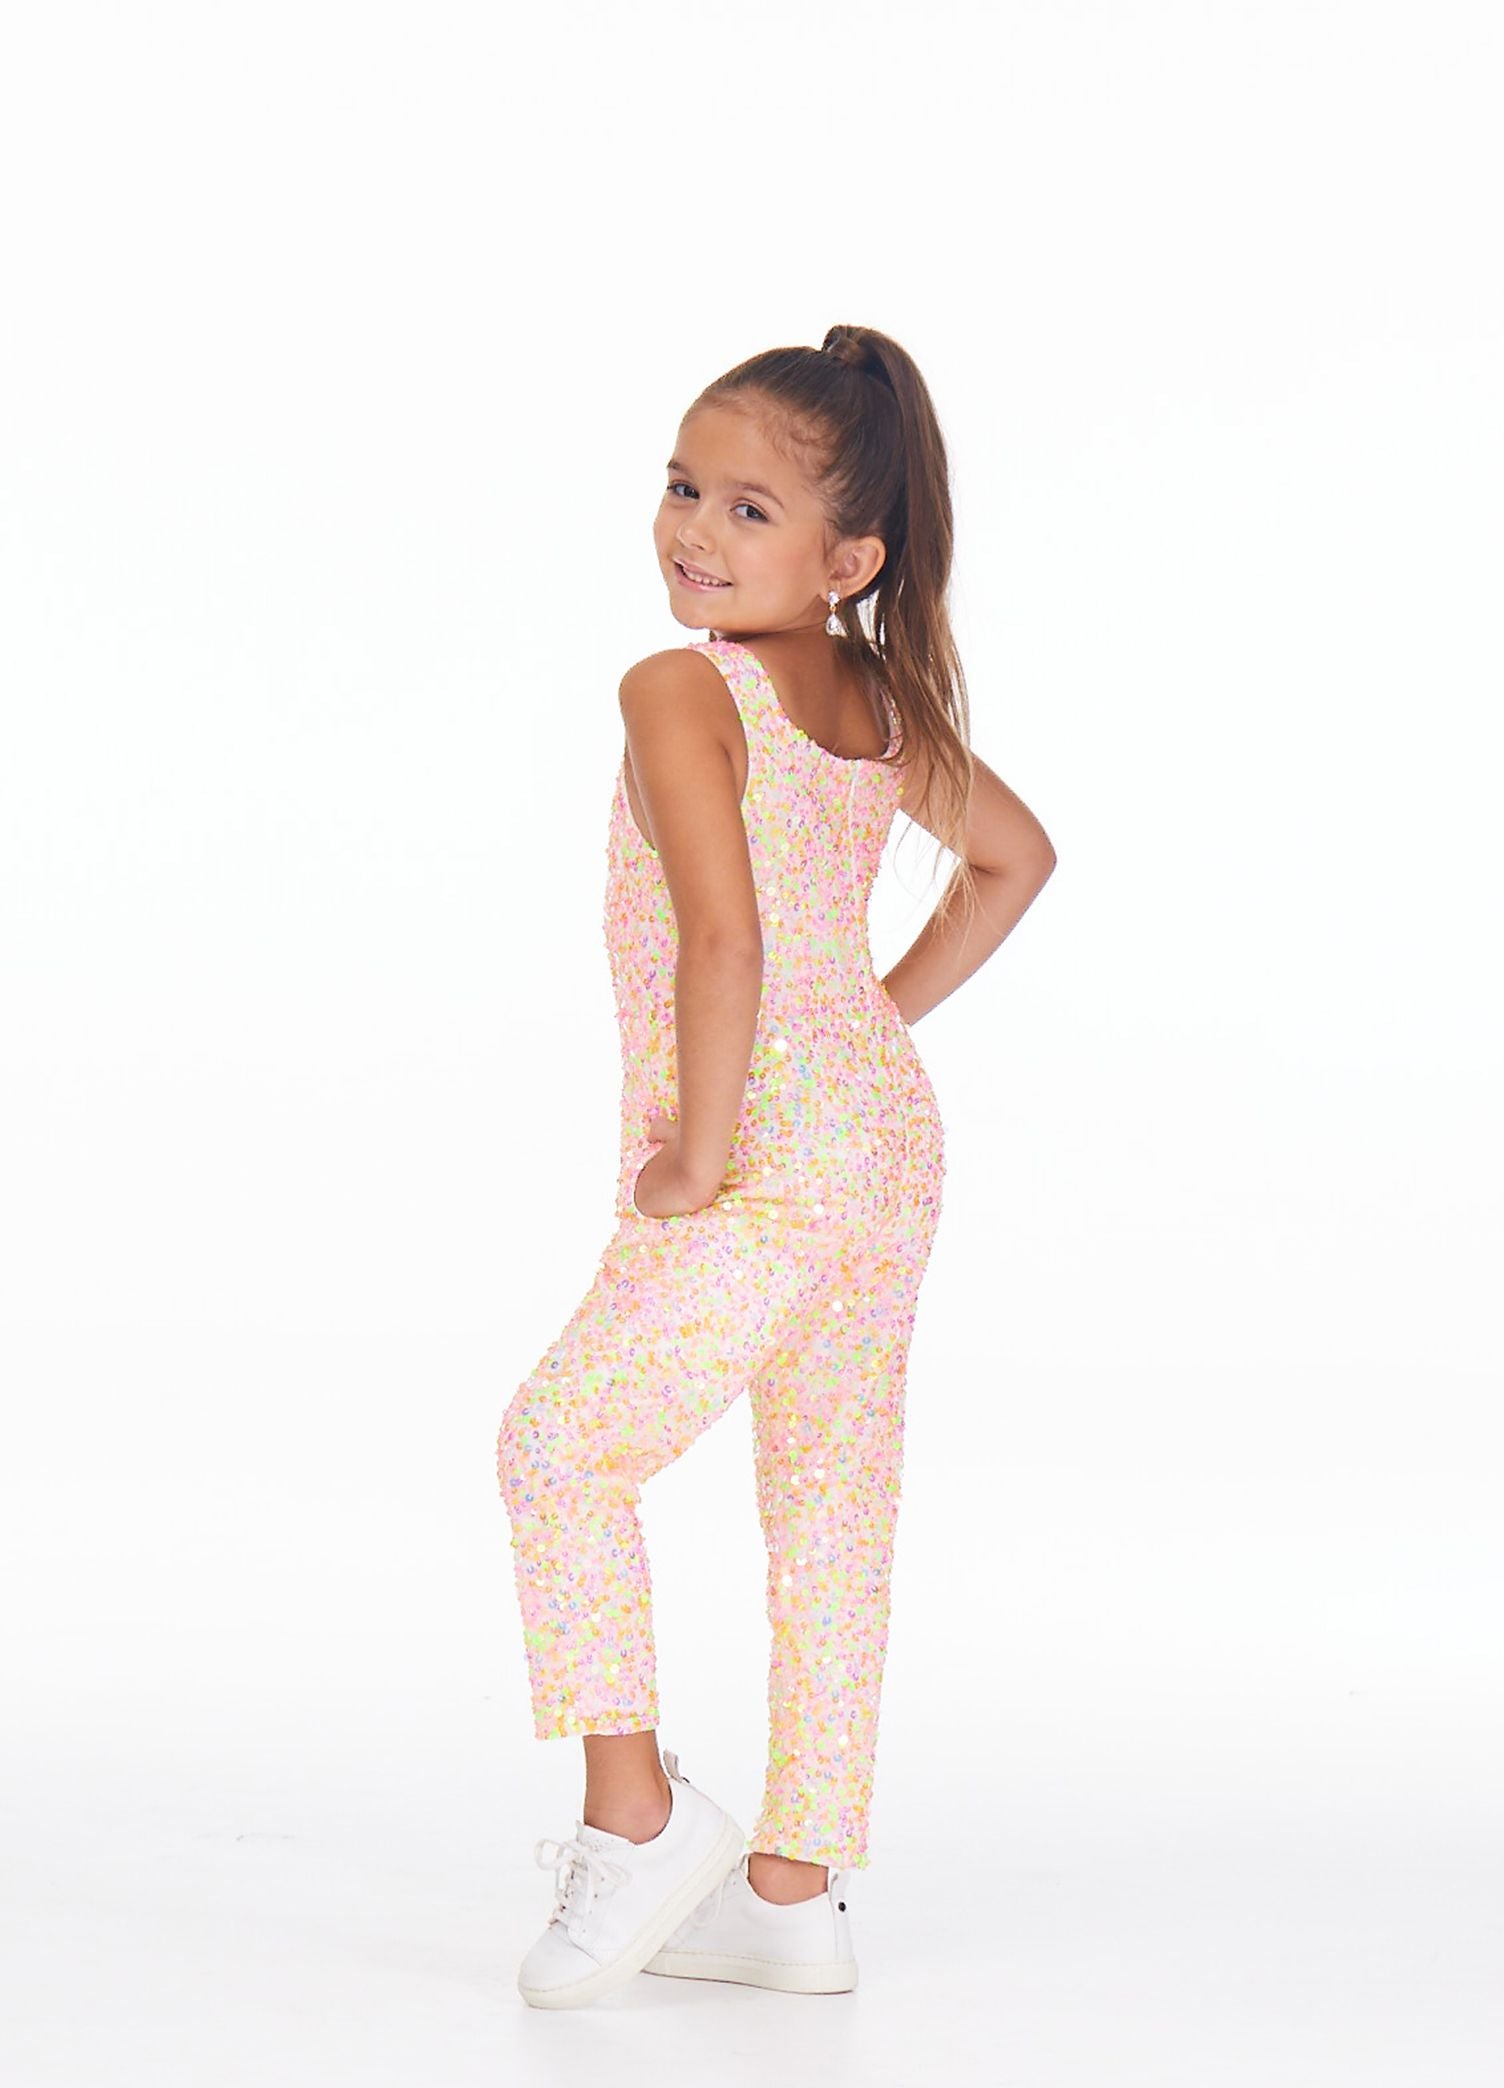 Ashley Lauren 8025 Sparkle at your next event in this fully beaded girls pageant jumpsuit. The top has modern tank style straps. The straight leg pants are complete with pockets.  Colors Multi/Ivory, Mint, Neon Green, Neon Orange, Red, Royal  Sizes 2, 4, 6, 8, 10, 12, 14, 16  Fully Beaded Jumpsuit Straight Pant Pockets